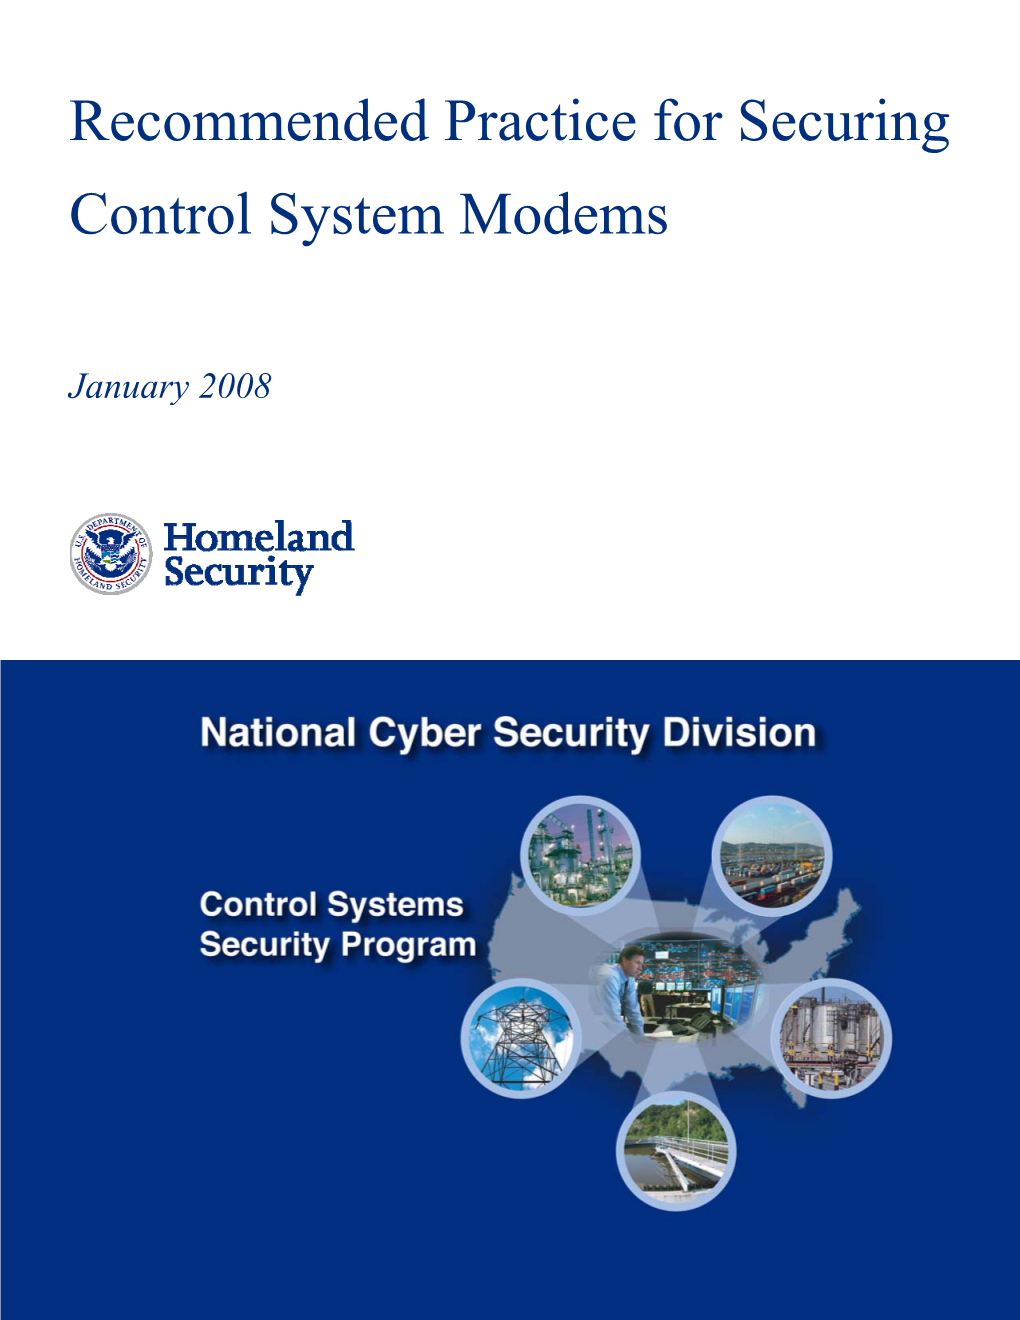 Securing Control Systems Modems